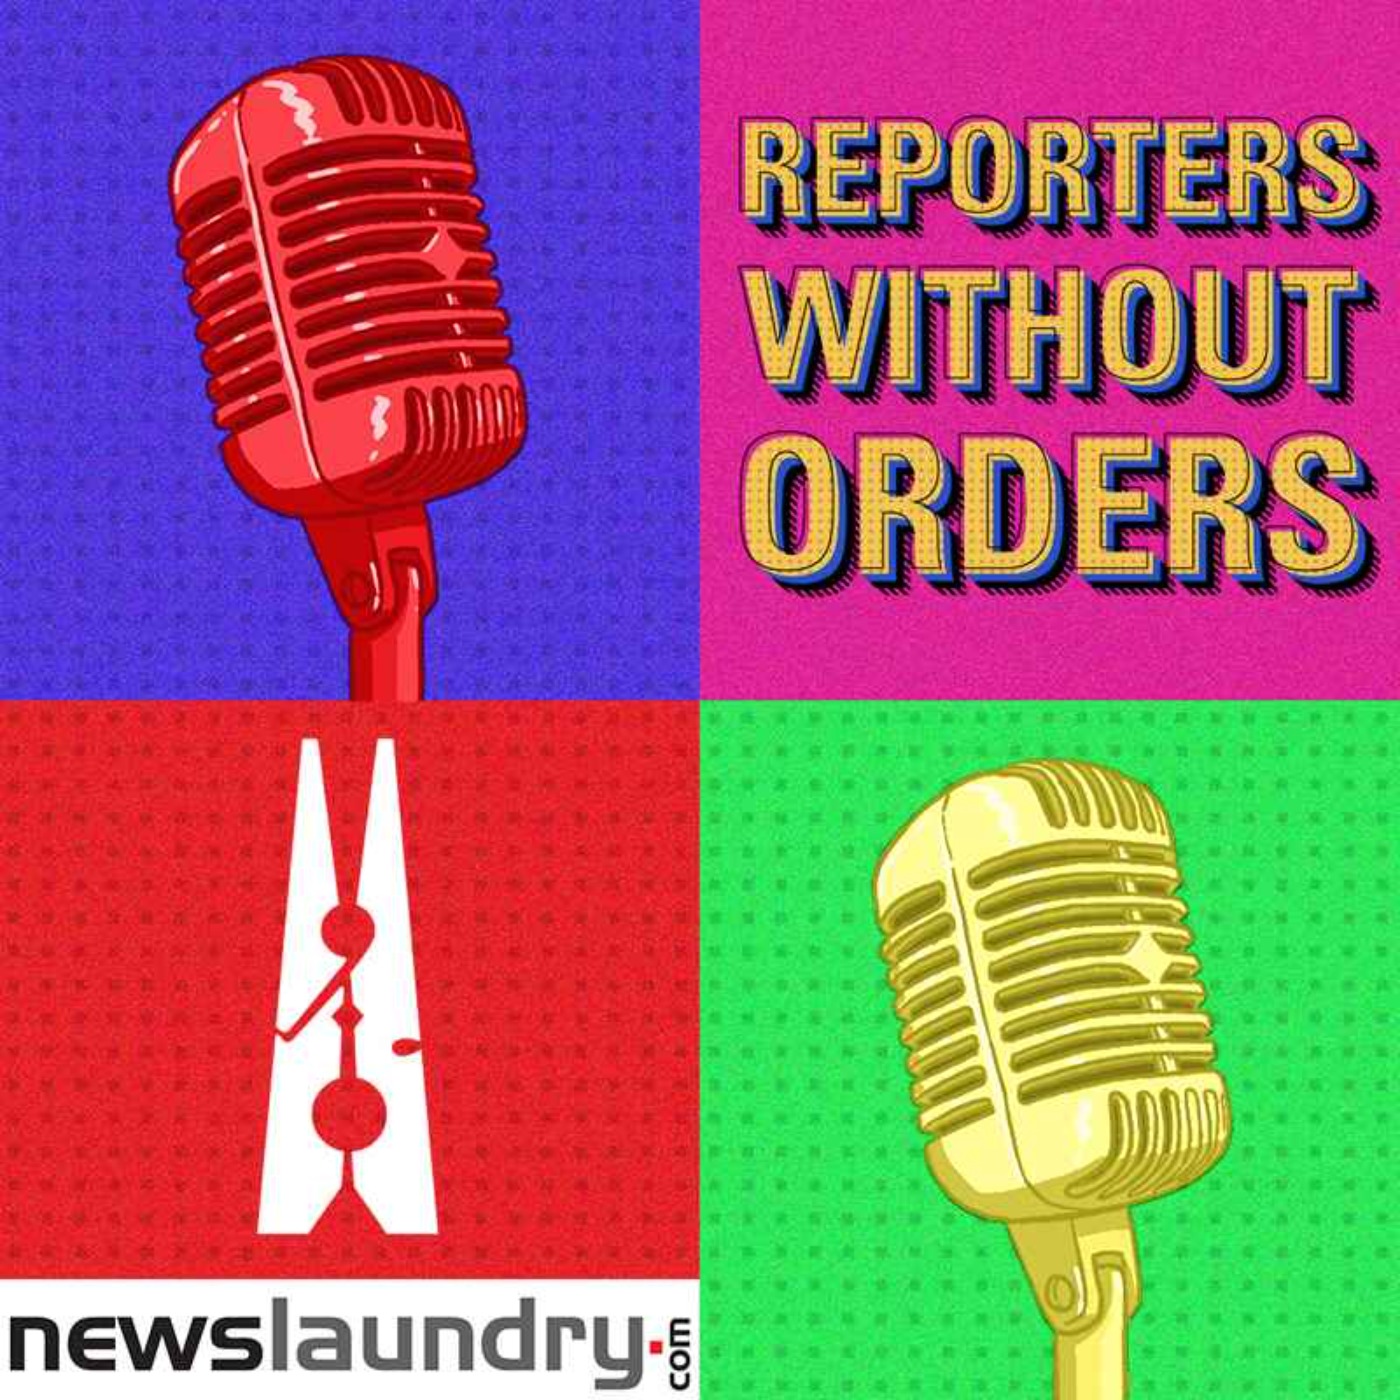 Reporters Without Orders Ep 311: NL-TNM’s investigation into political funding